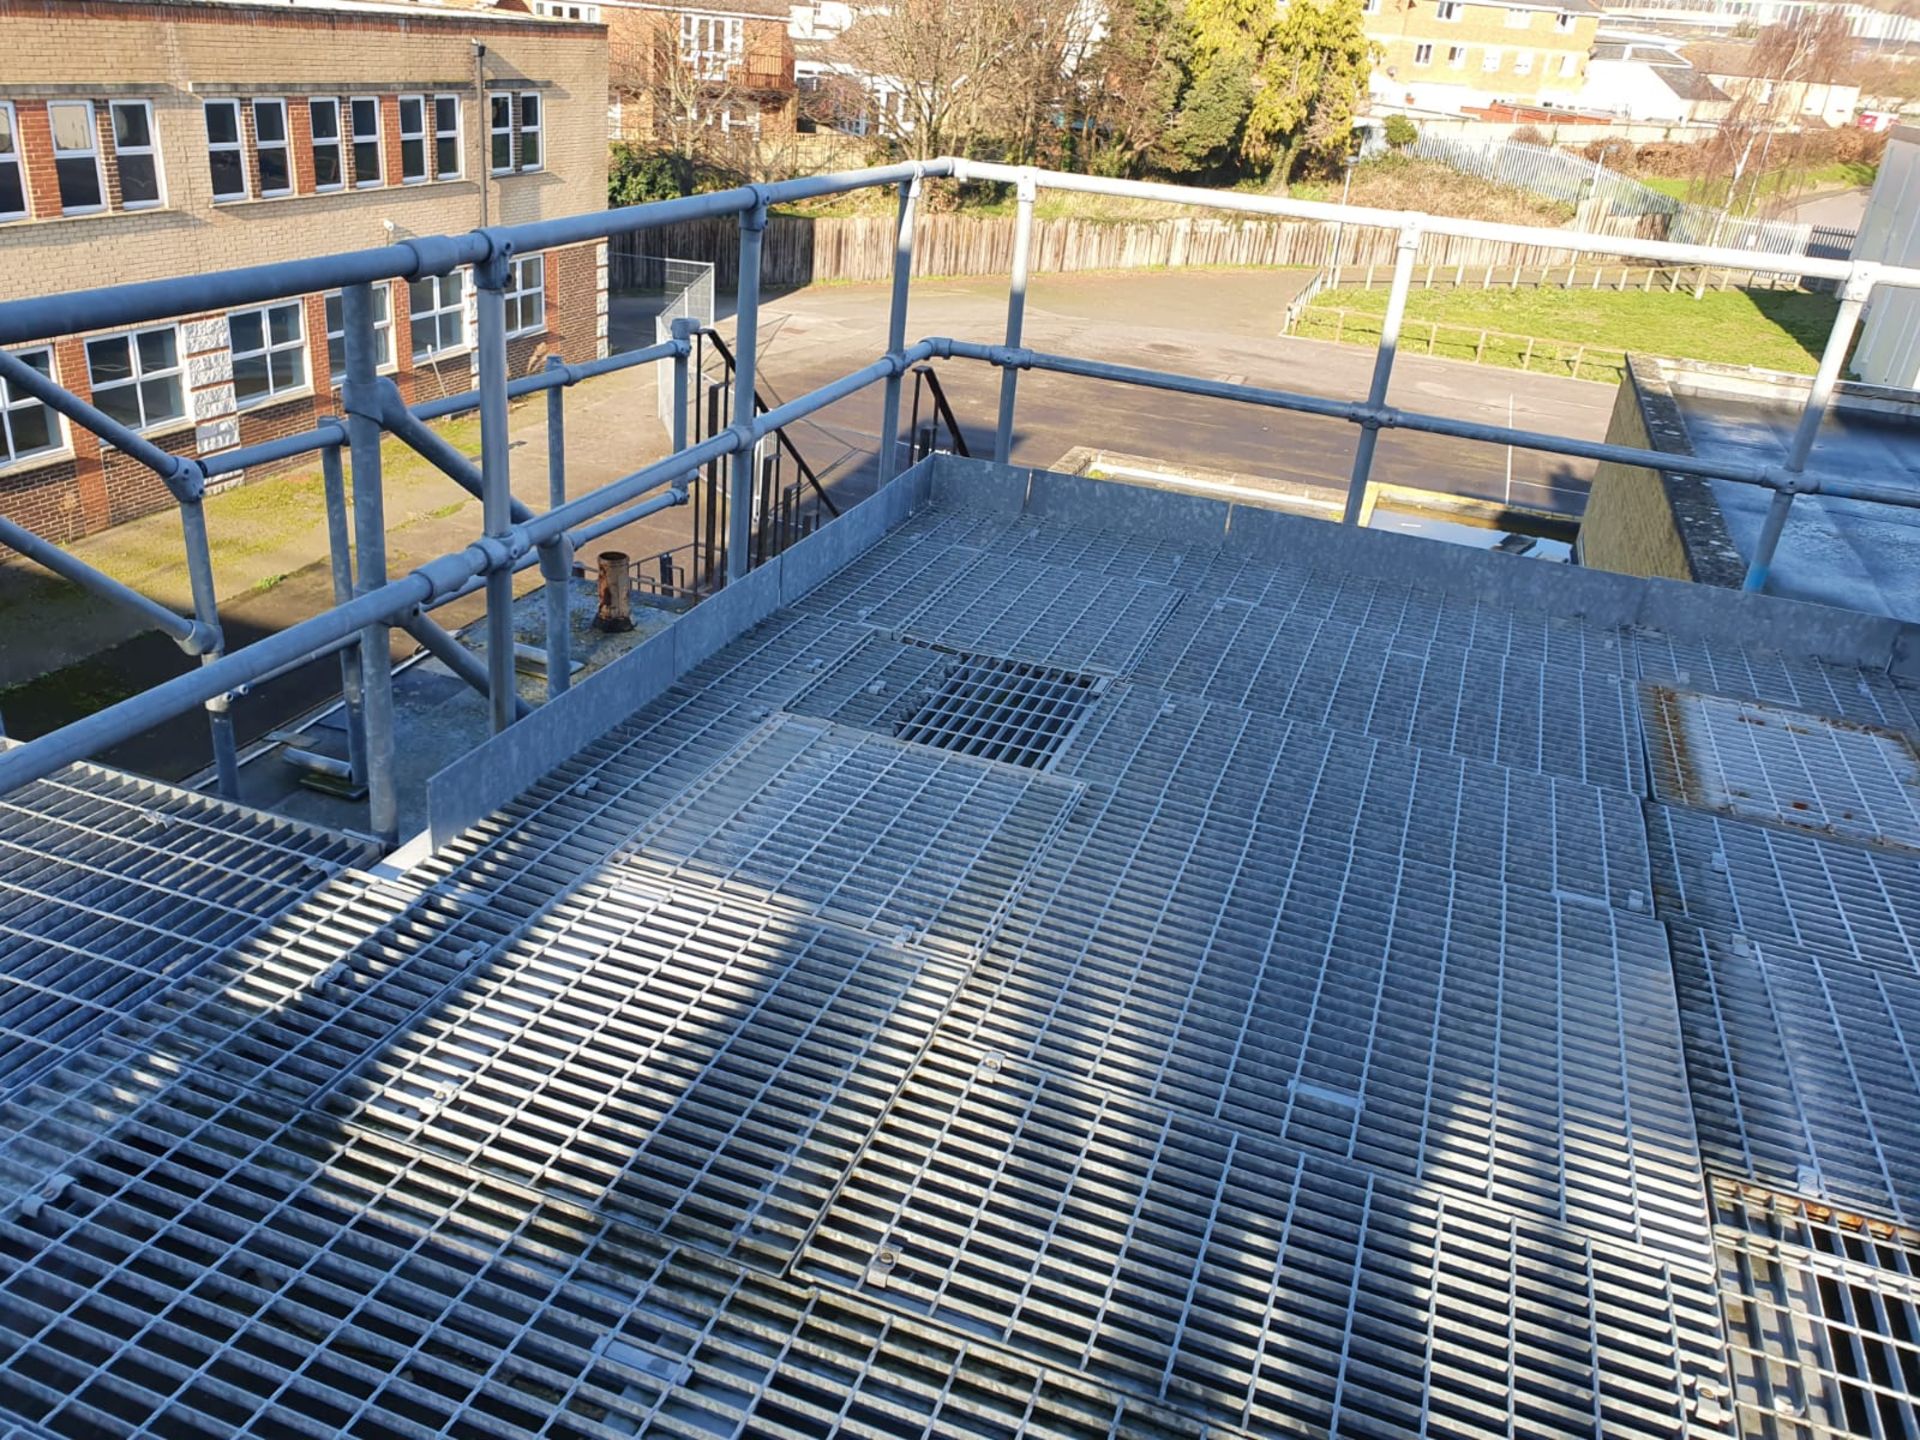 1 x Outdoor Rooftop Mezzanine Floor With Grid Anti Slip Floor Surface and Safety Hand Rails - - Image 3 of 10